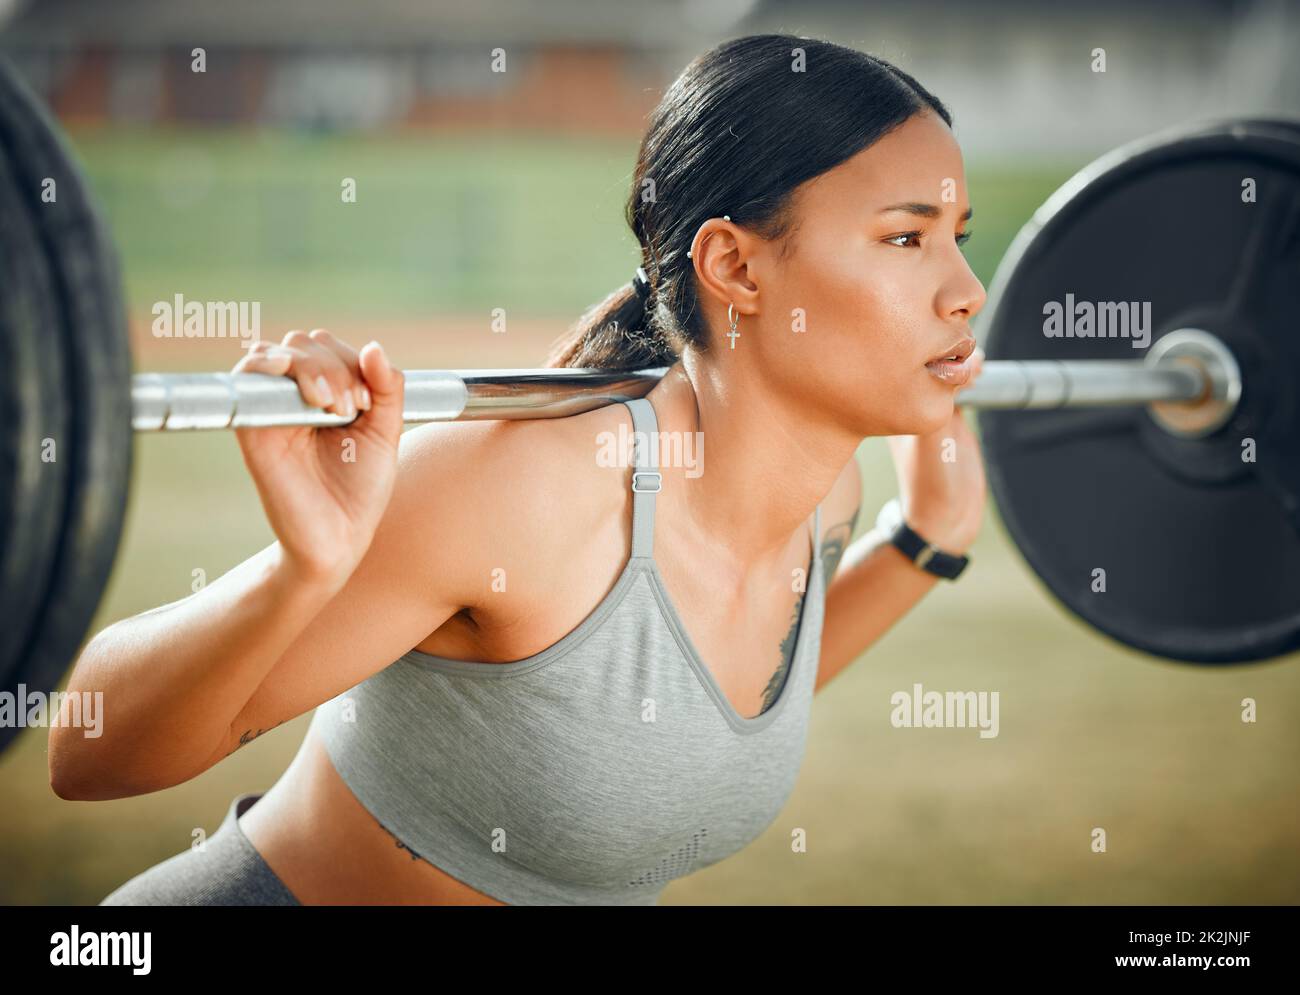 Lifting her spirits. Cropped shot of an attractive young female athlete exercising with weights outdoors. Stock Photo